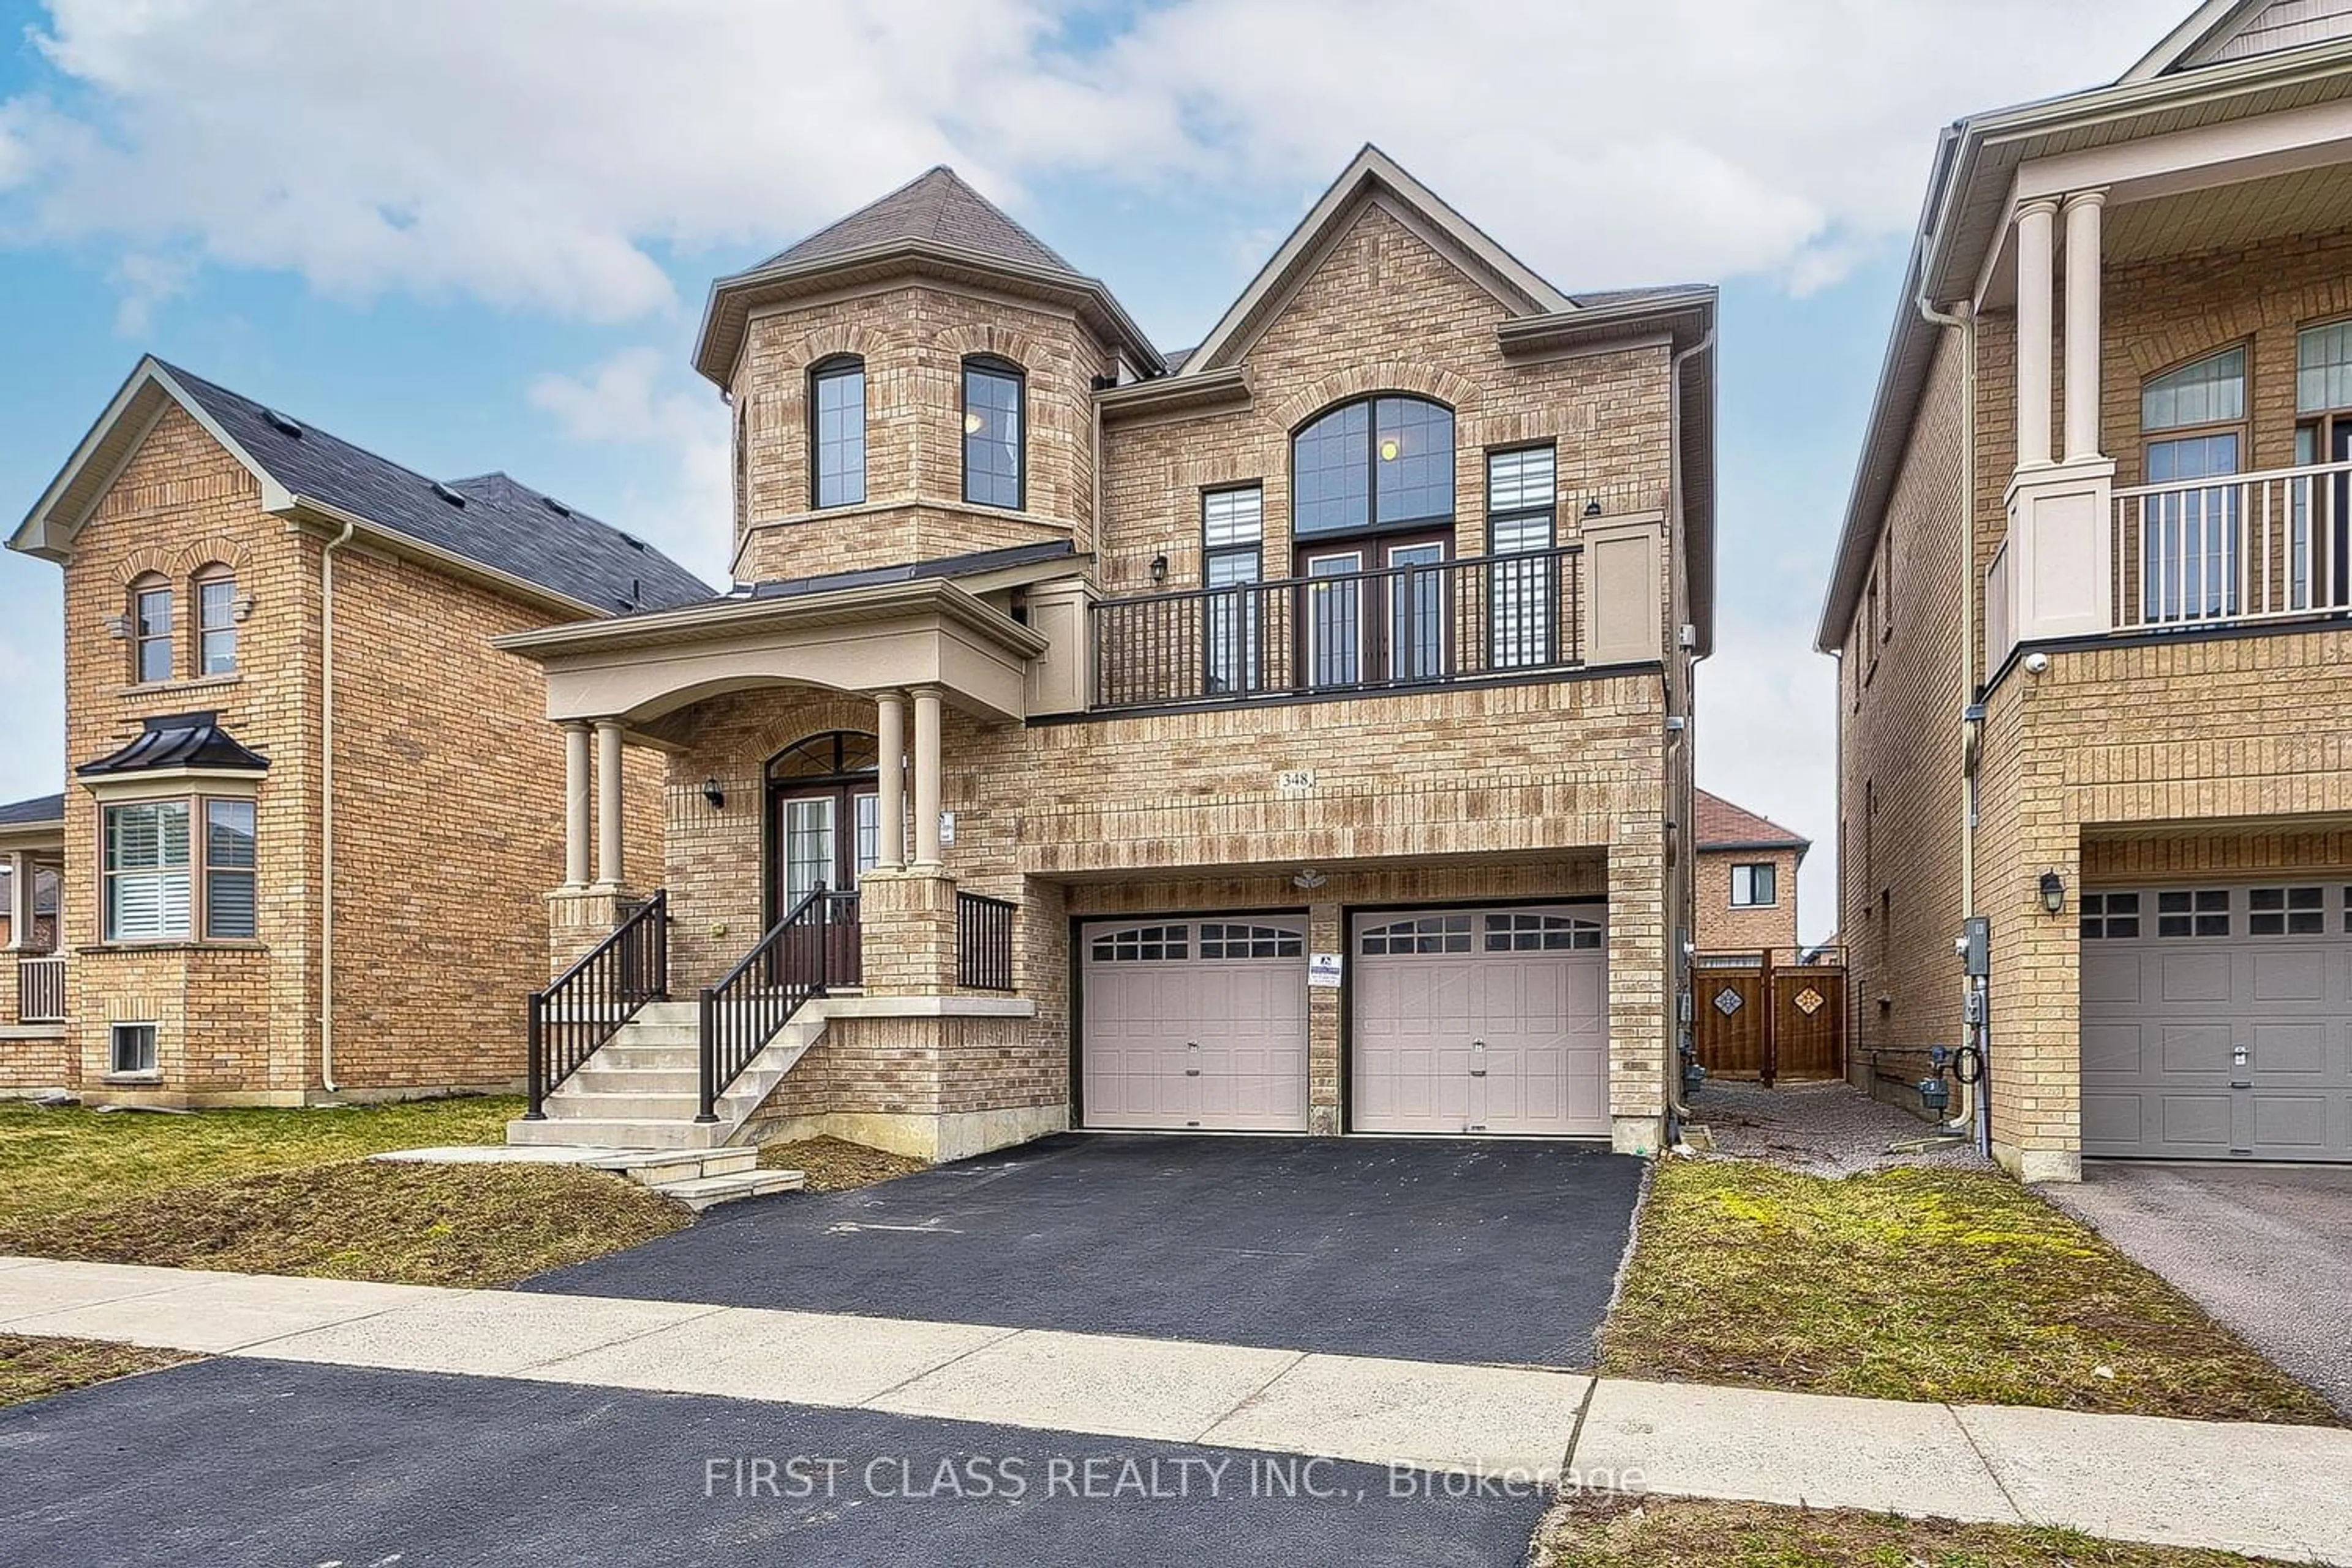 Home with brick exterior material for 348 Baker Hill Blvd, Whitchurch-Stouffville Ontario L4A 4P3